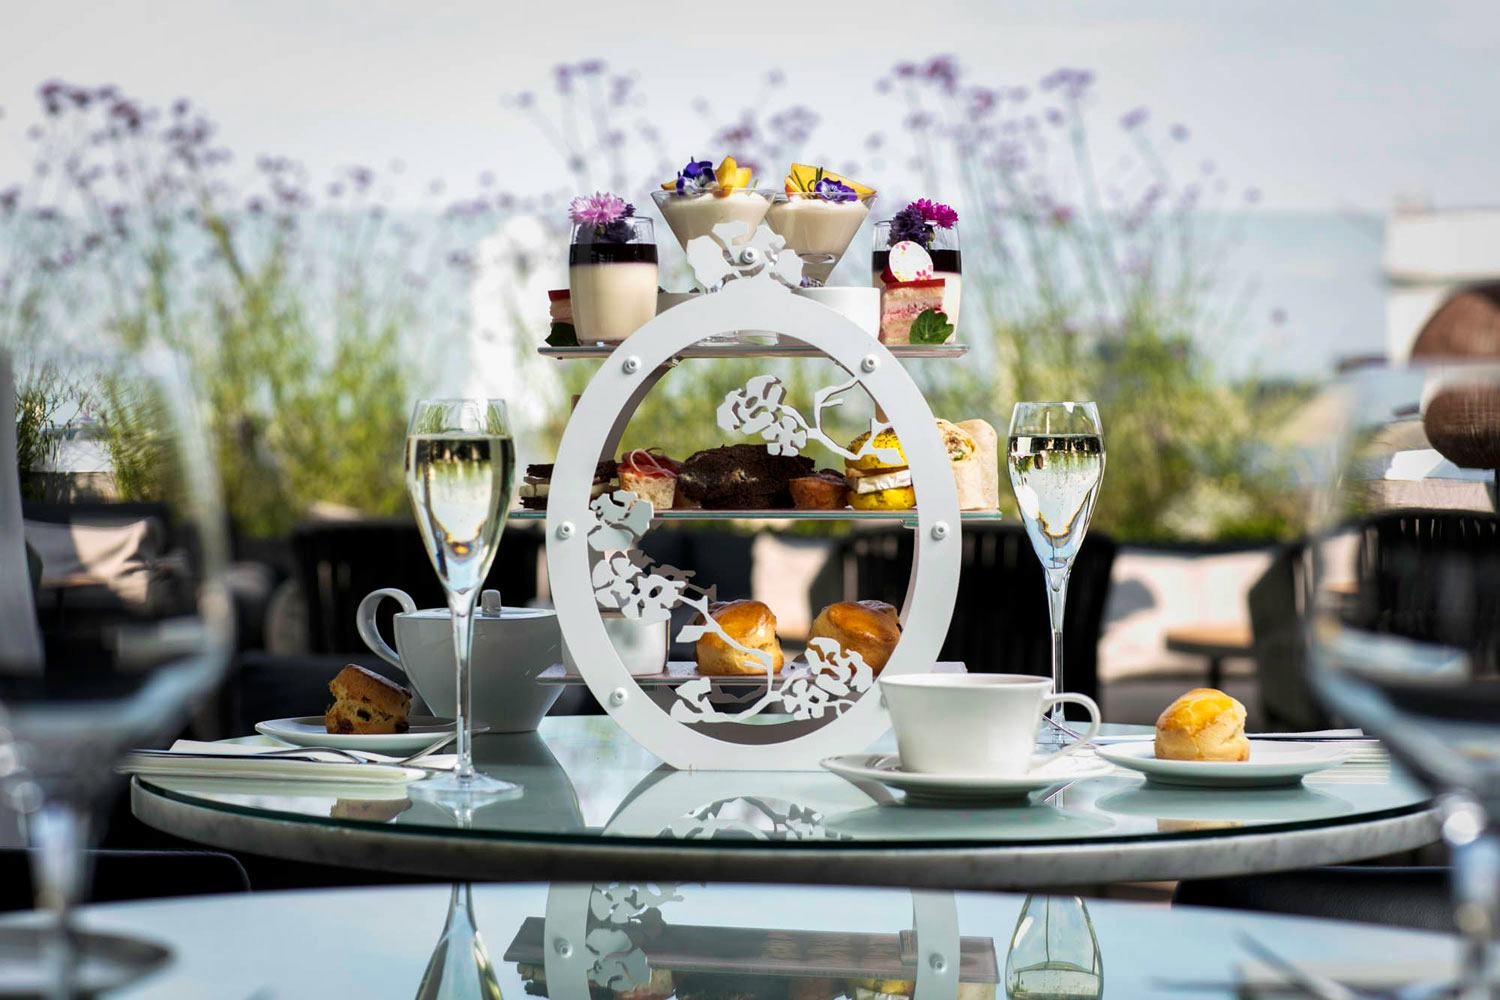 Afternoon tea dishes at radio rooftop